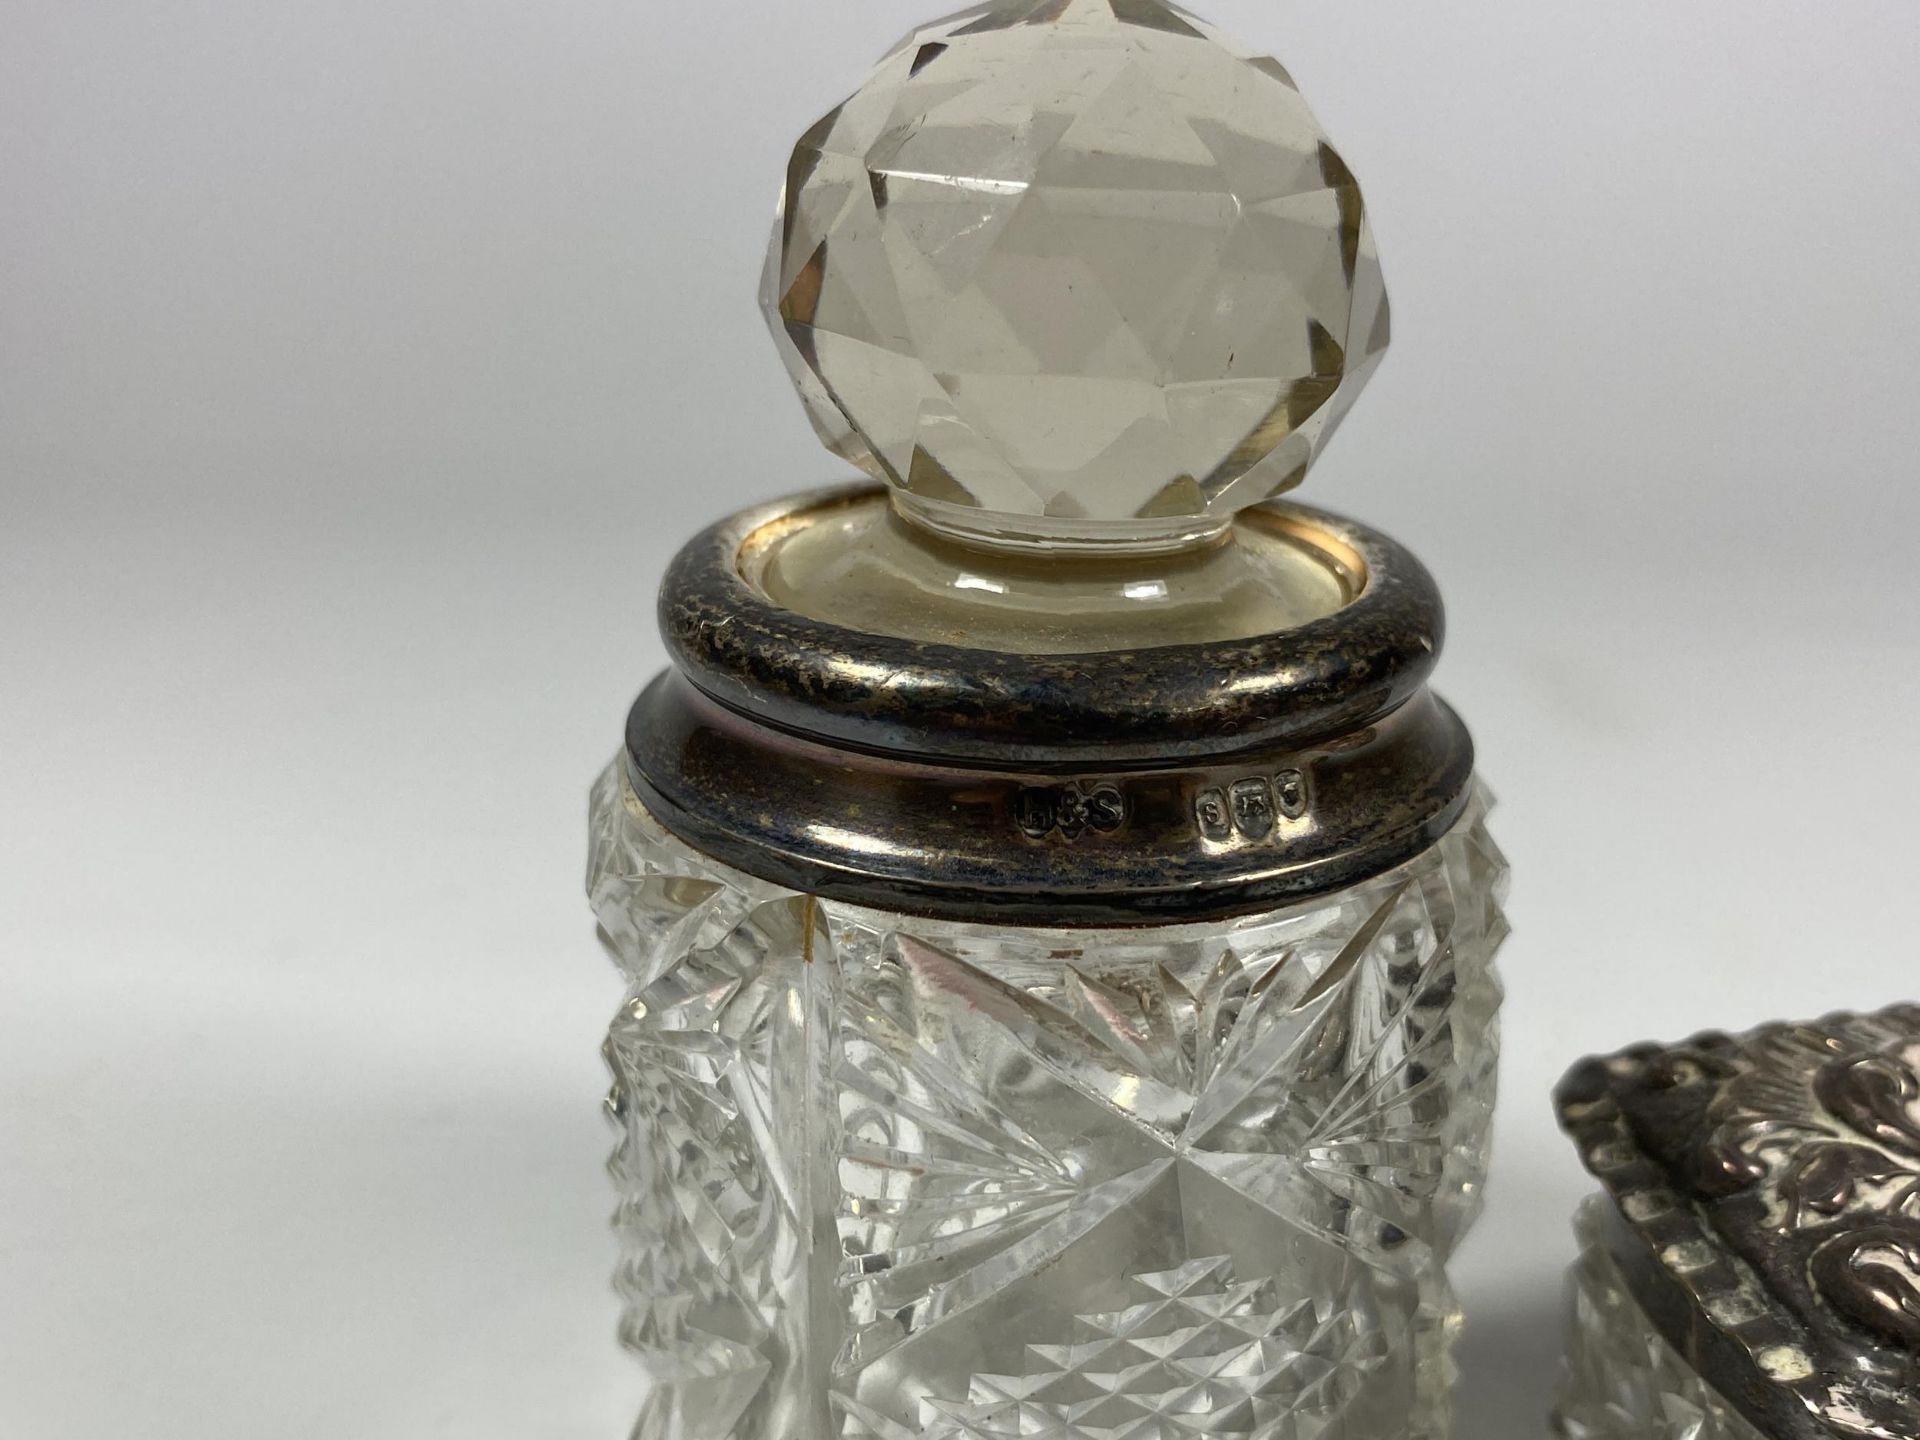 TWO HALLMARKED SILVER AND CUT GLASS DRESSING TABLE ITEMS - PERFUME BOTTLE & TRINKET BOX - Image 2 of 3